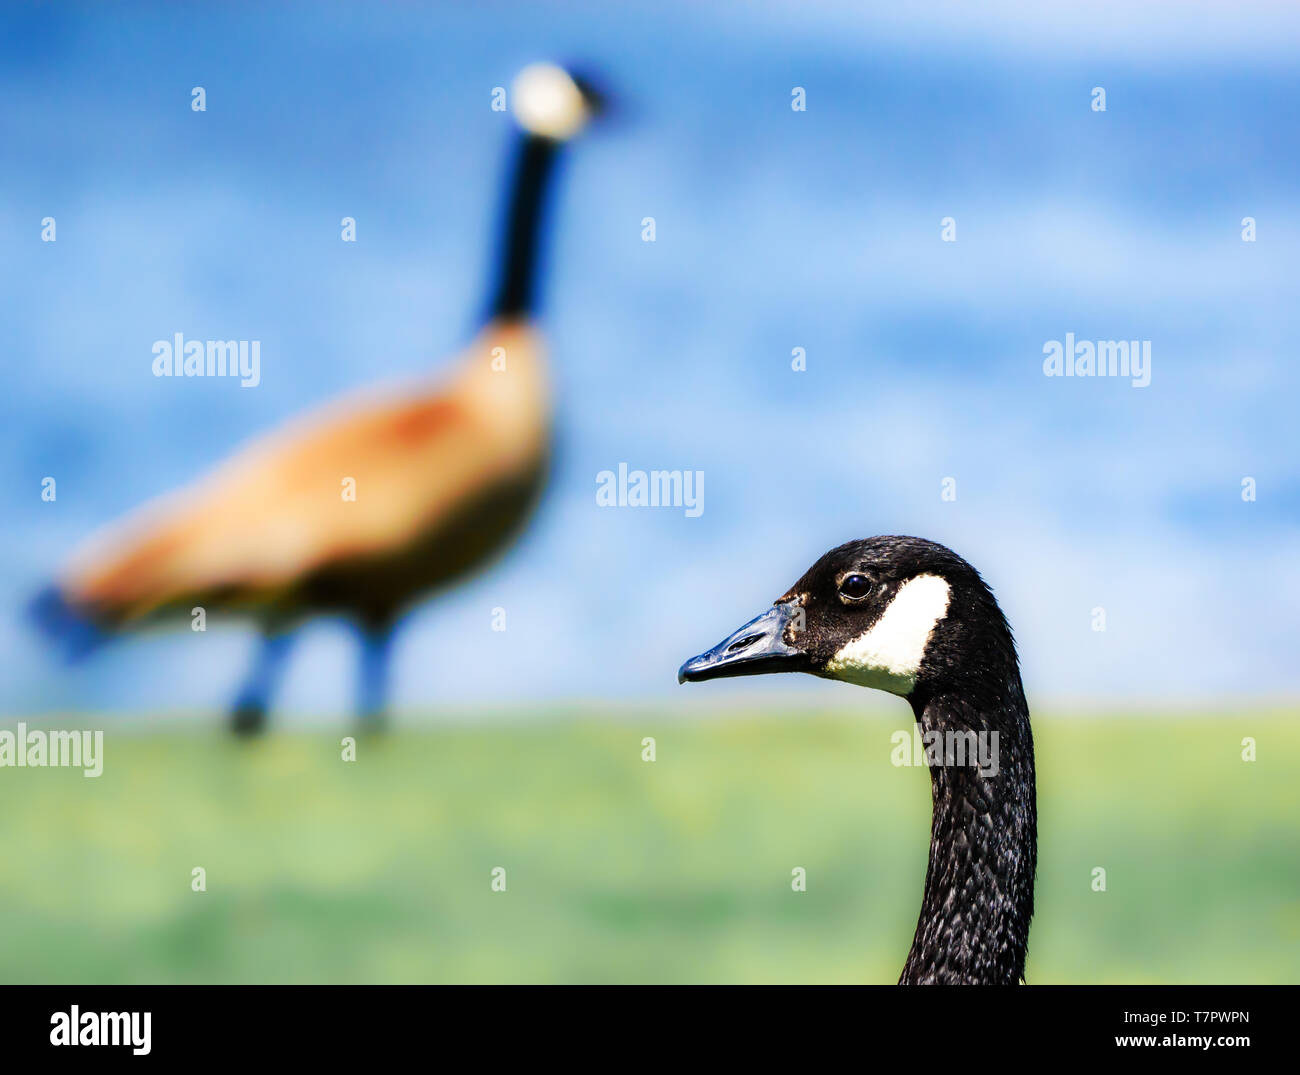 Pair of Colorful Male Geese - Ganders in high color blue and green contrast crisp forefront portrait with second goose in blurred (bokeh) background Stock Photo